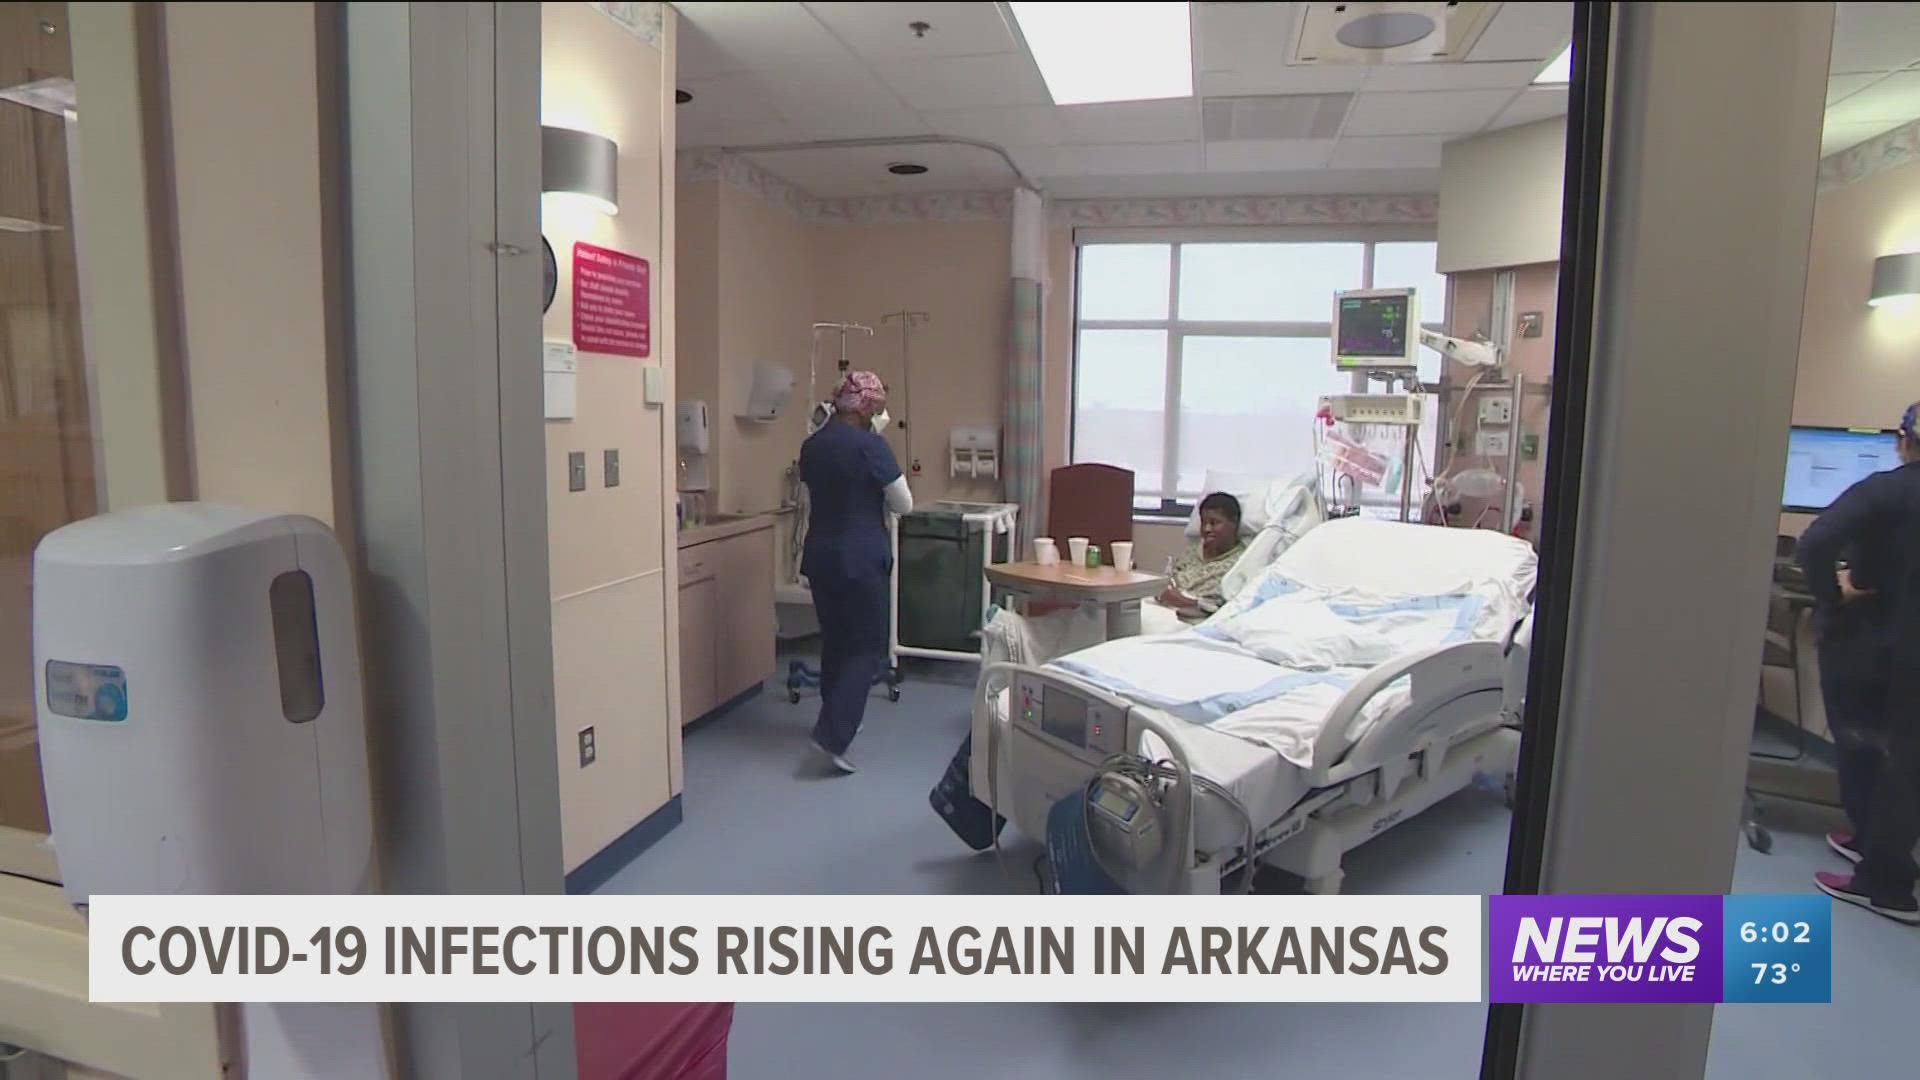 The Arkansas Department of Health reported the last time Arkansas was under 1,000 active COVID cases was April 18. Since then, numbers have continued to grow.